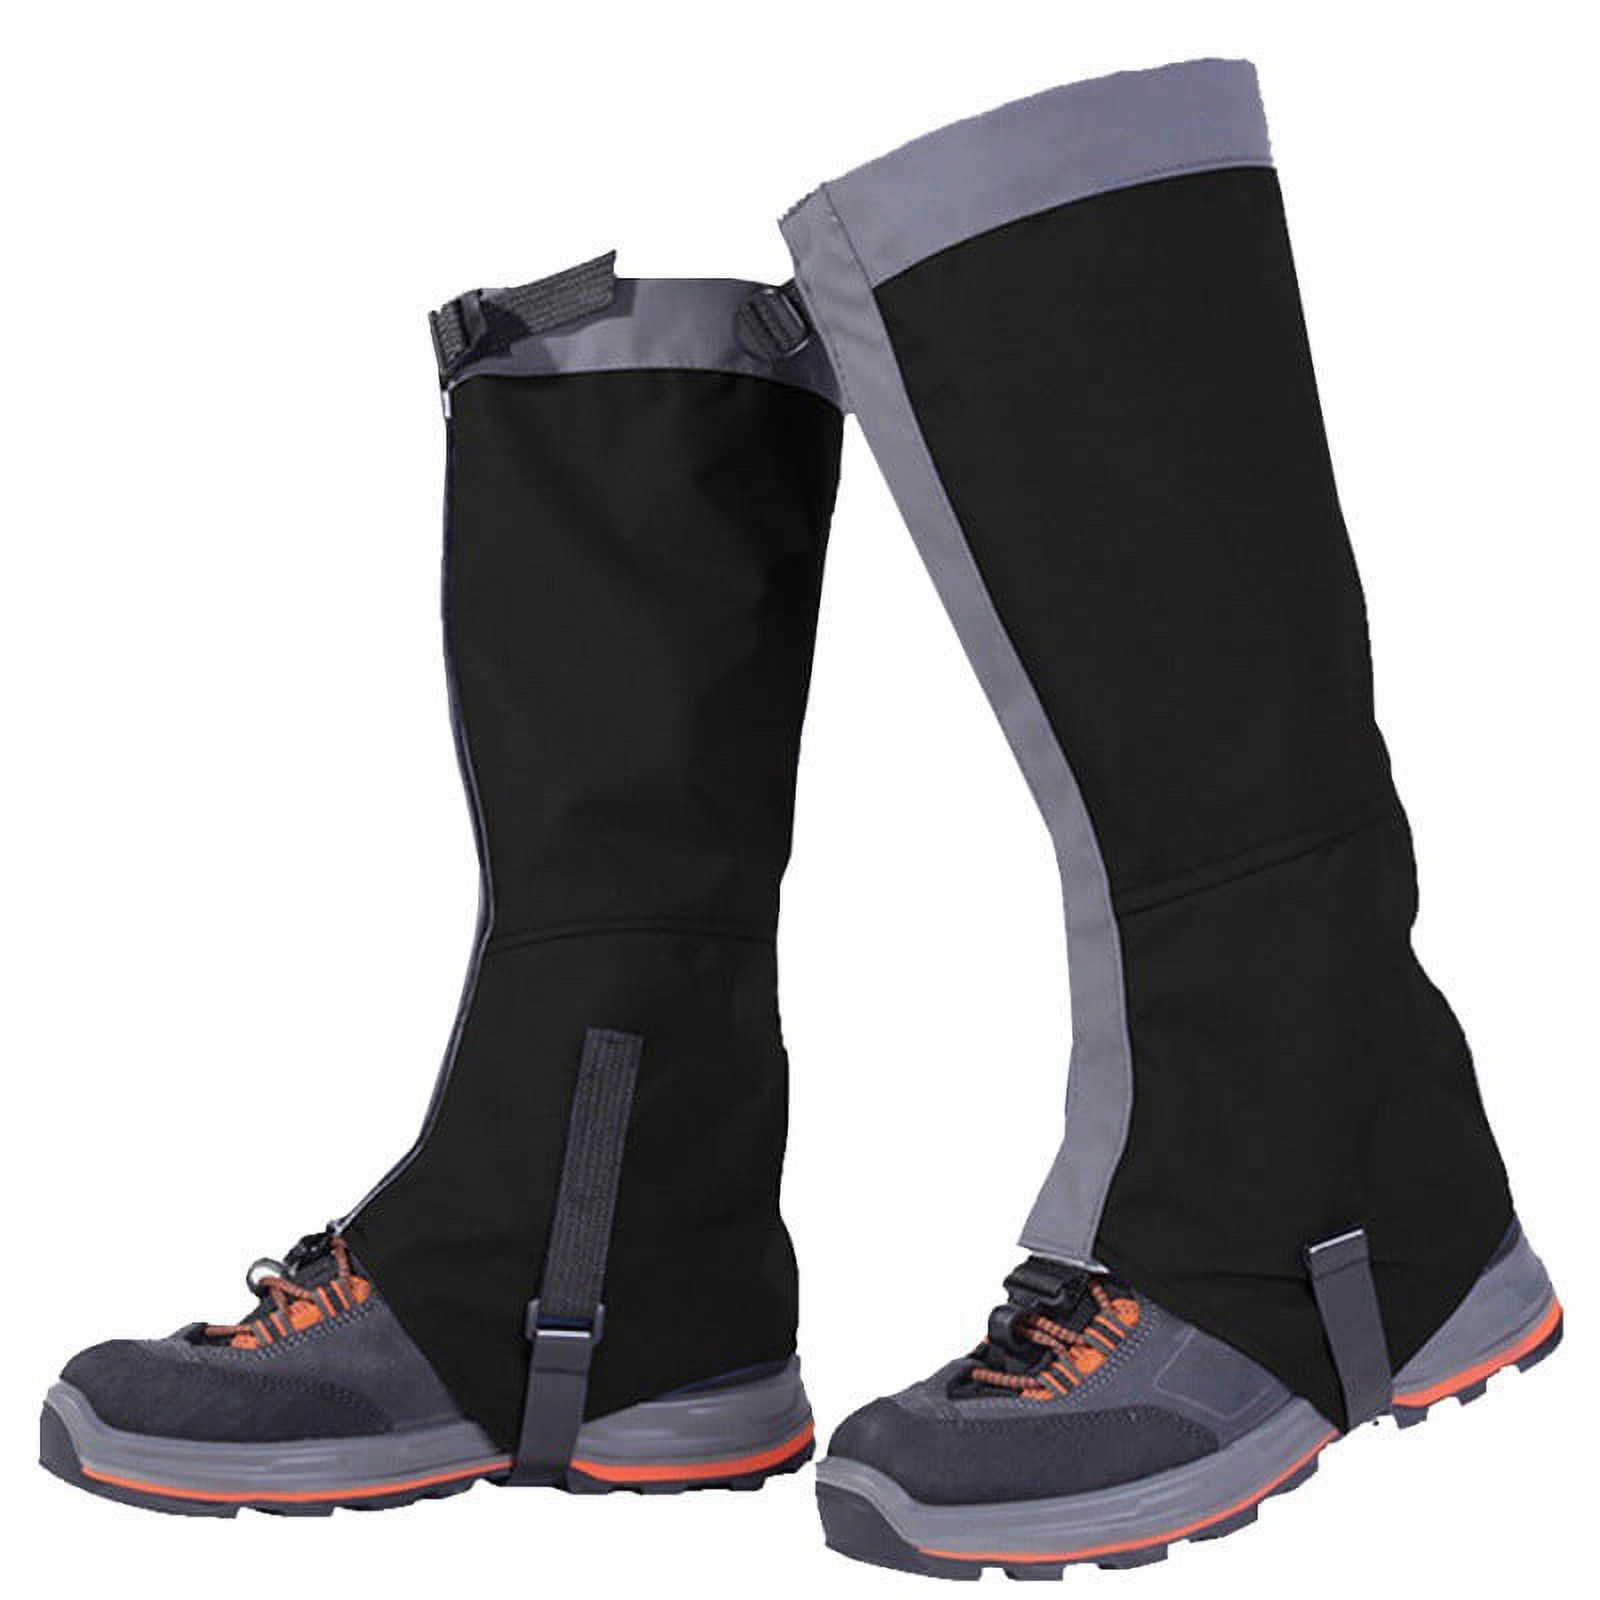 Outdoor Mountain Hiking Hunting Boot Gaiters Waterproof Snow Snake High Leg Shoes Cover - image 2 of 2